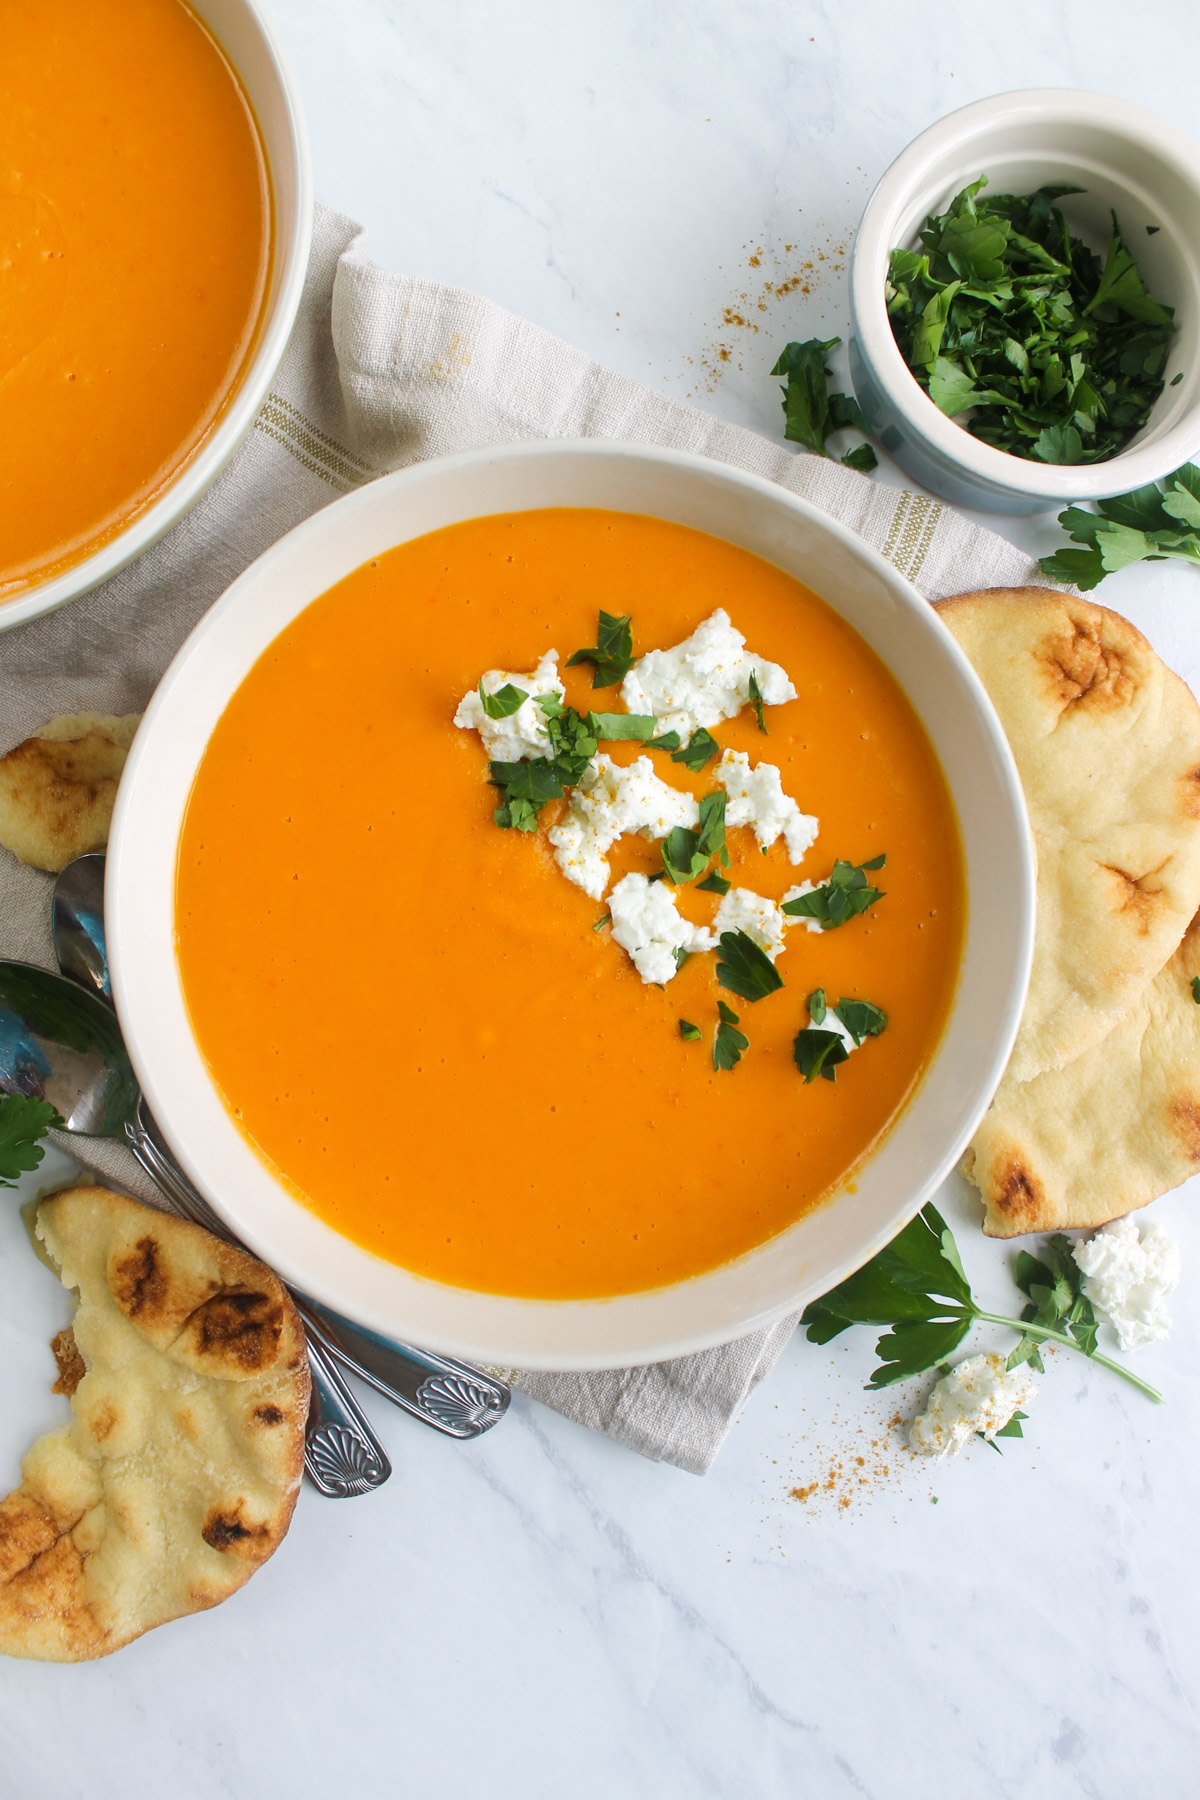 Bowls of butternut squash orange and ginger soup with naan bread.